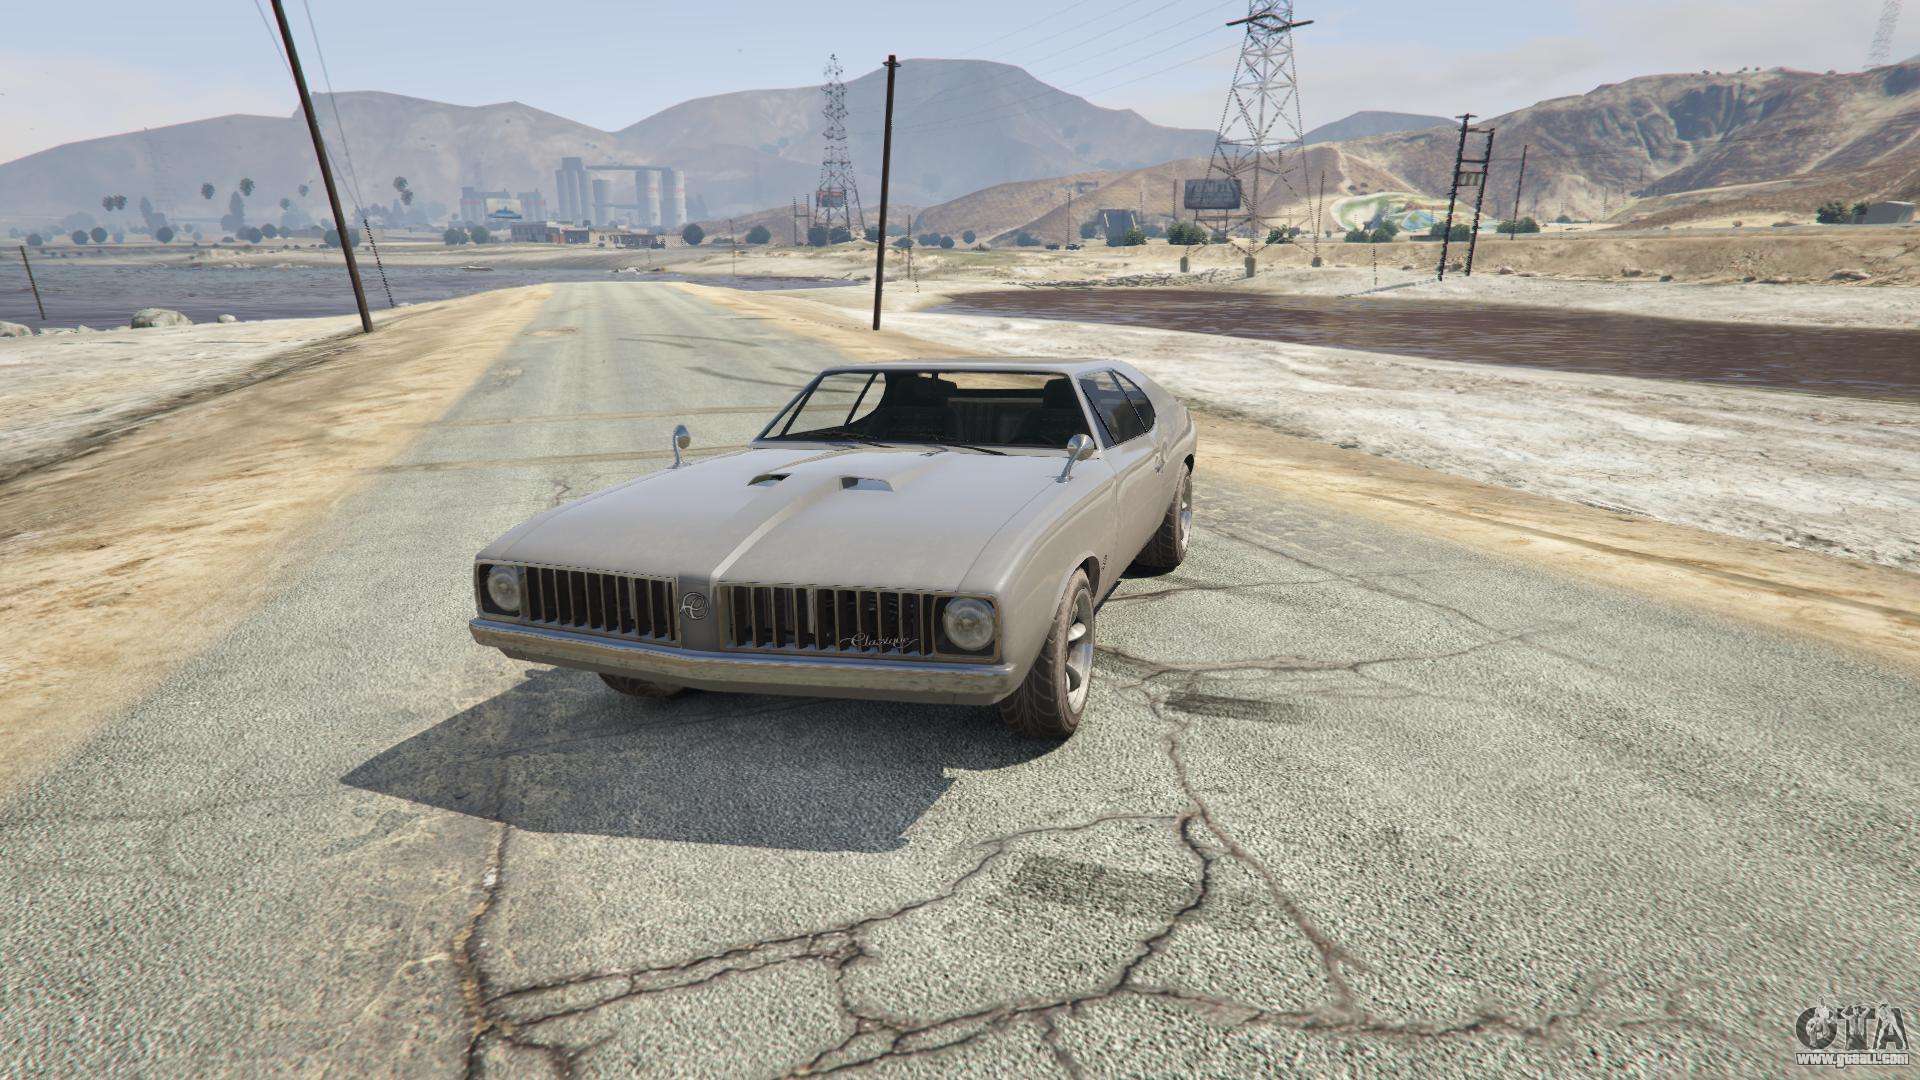 Stallion from GTA 5 - front view